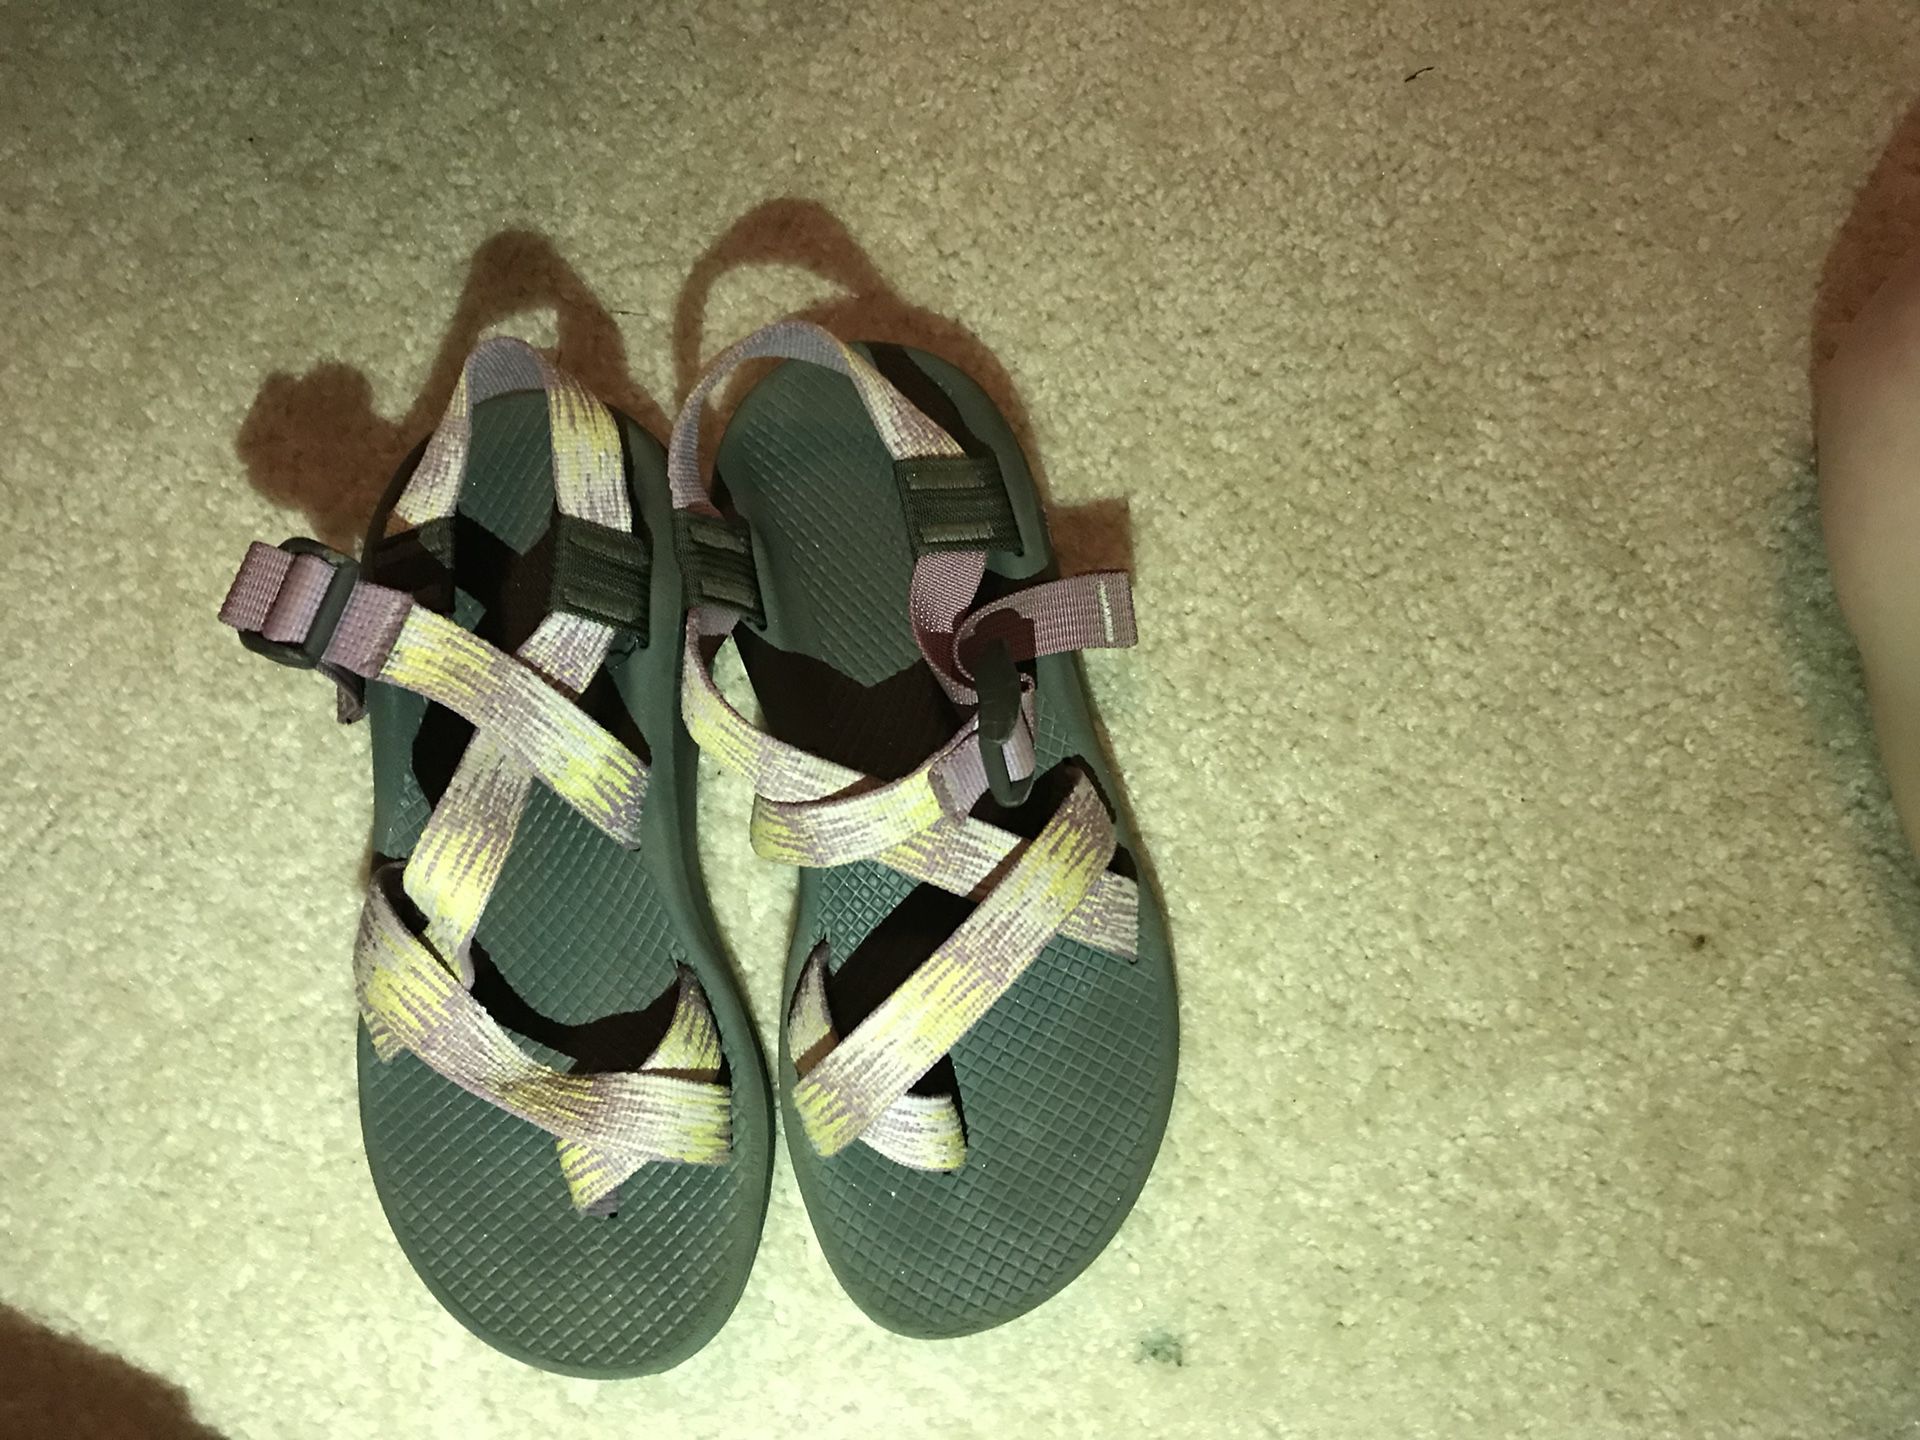 Chacos size 7 womens